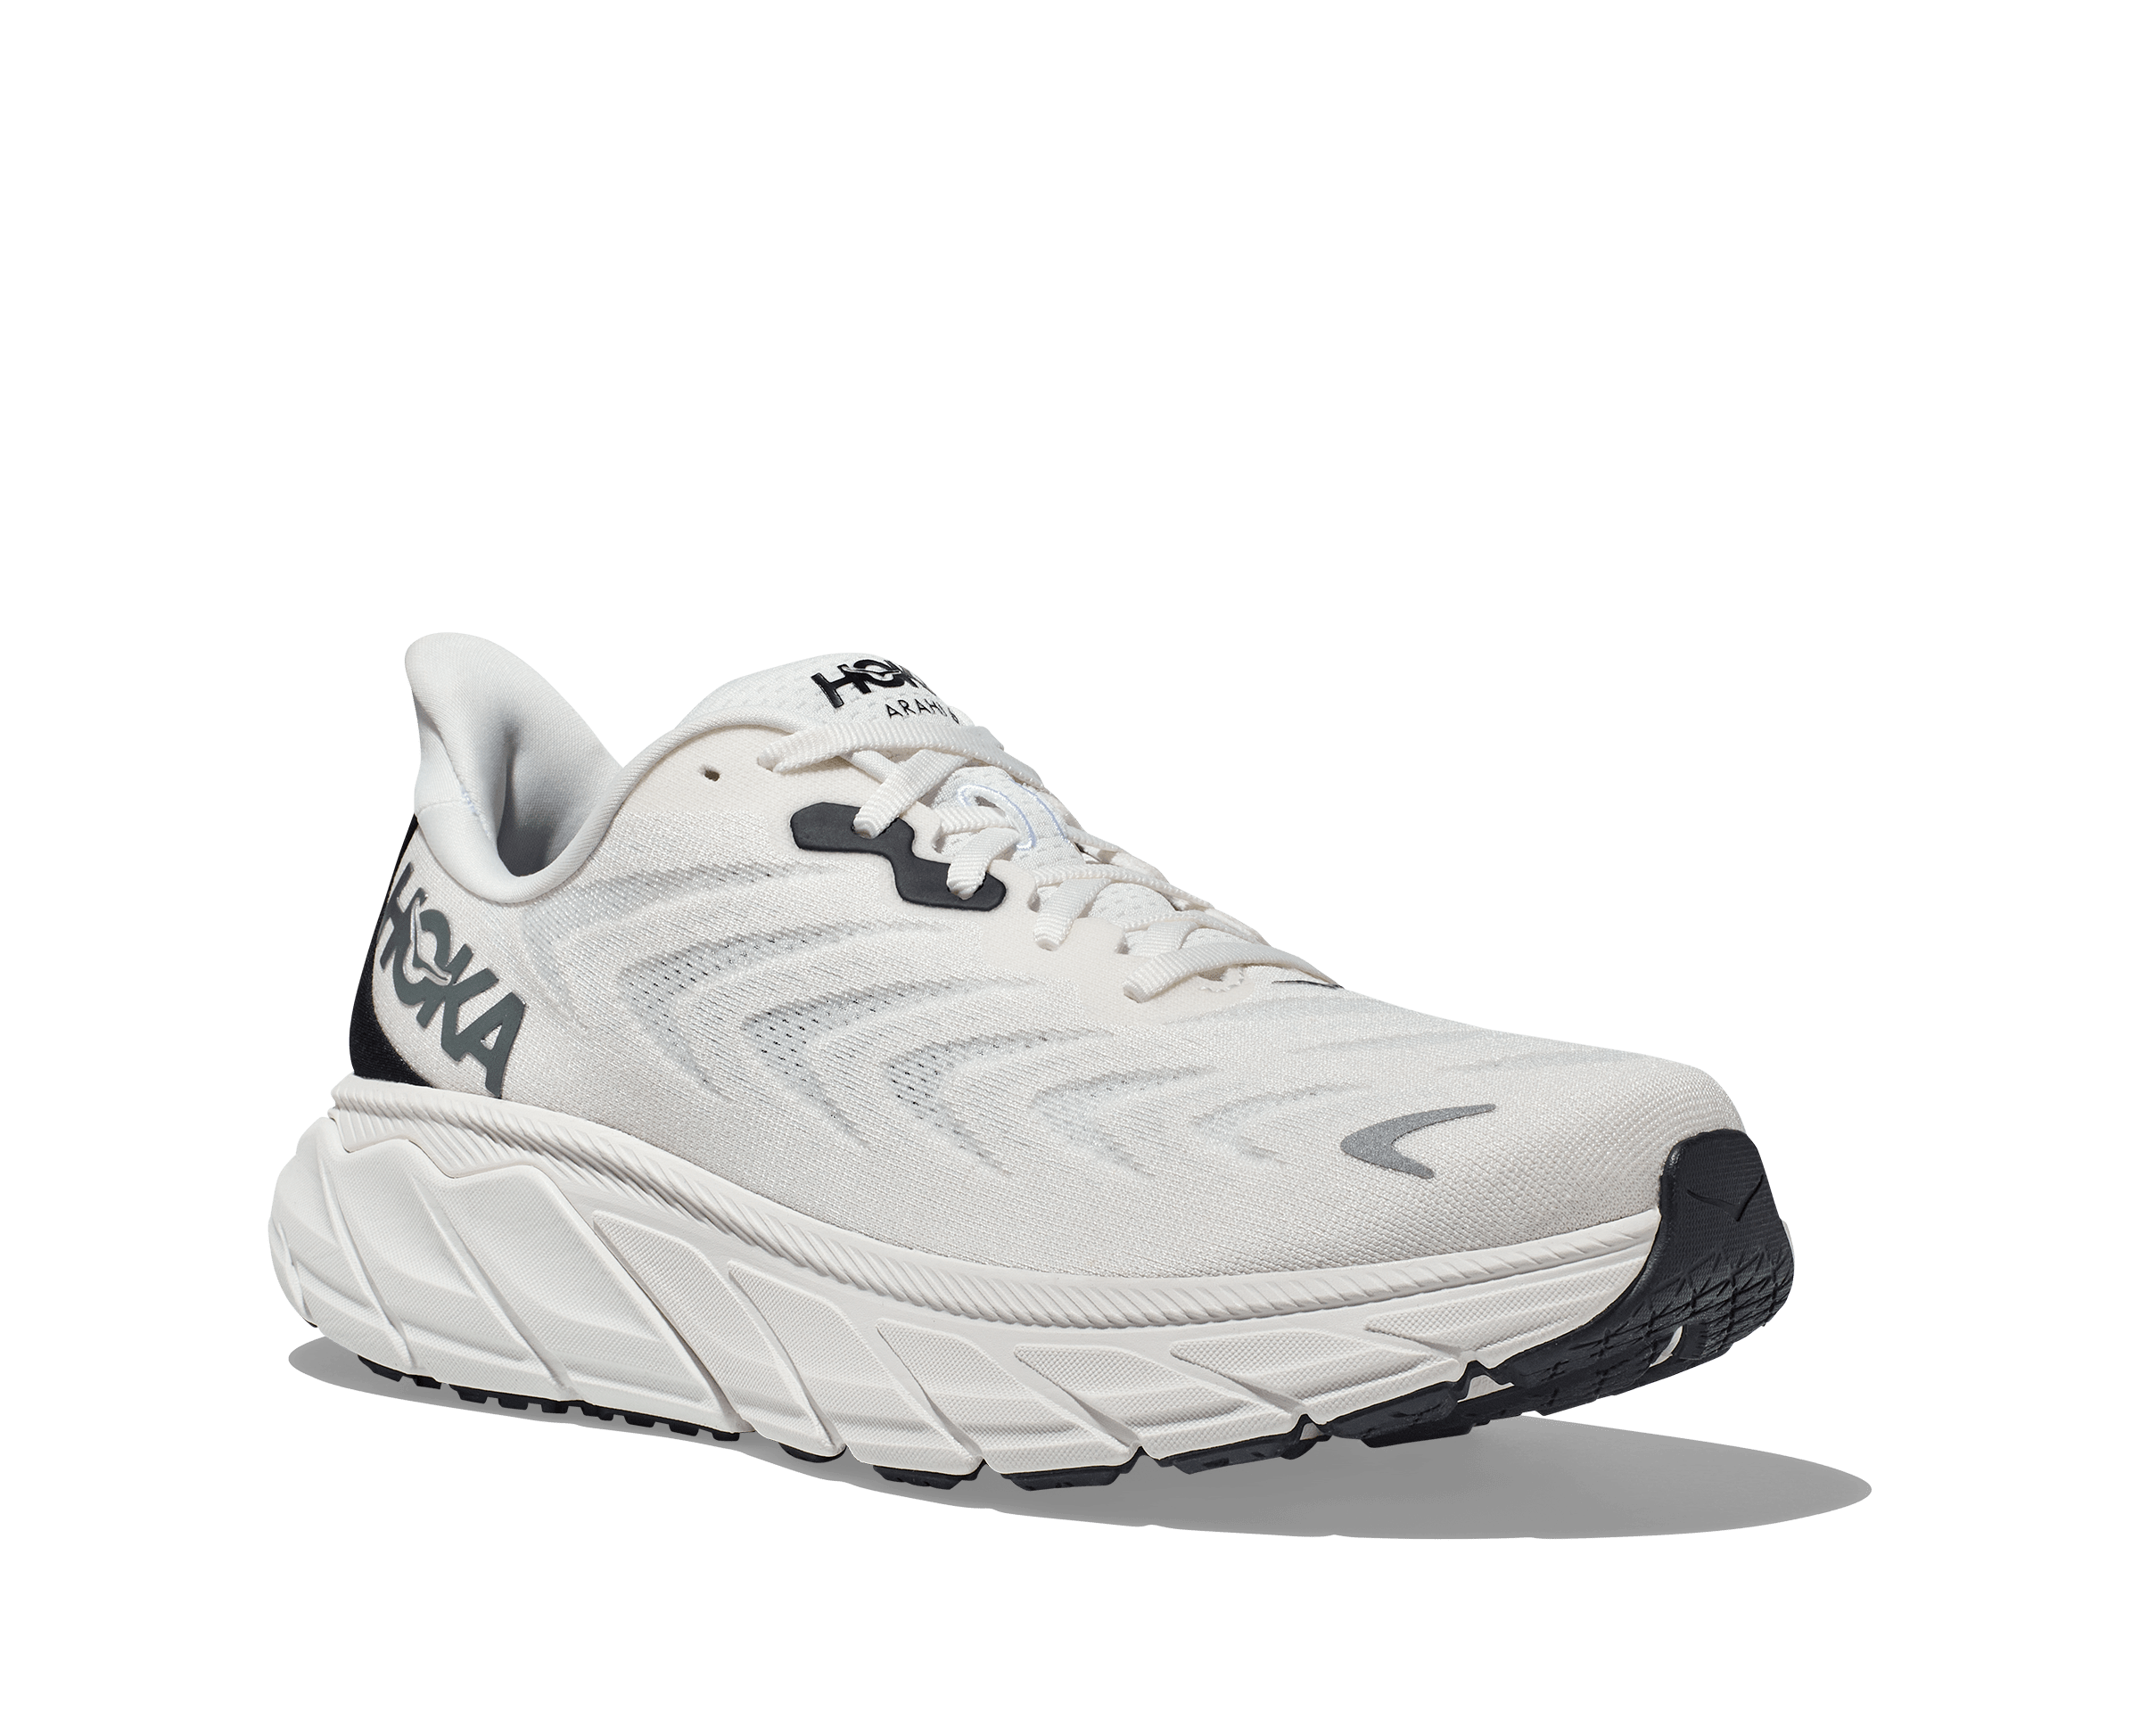 Lateral angled view of the Men's HOKA Arahi 6 in the color Blanc de Blanc/Steel Wool